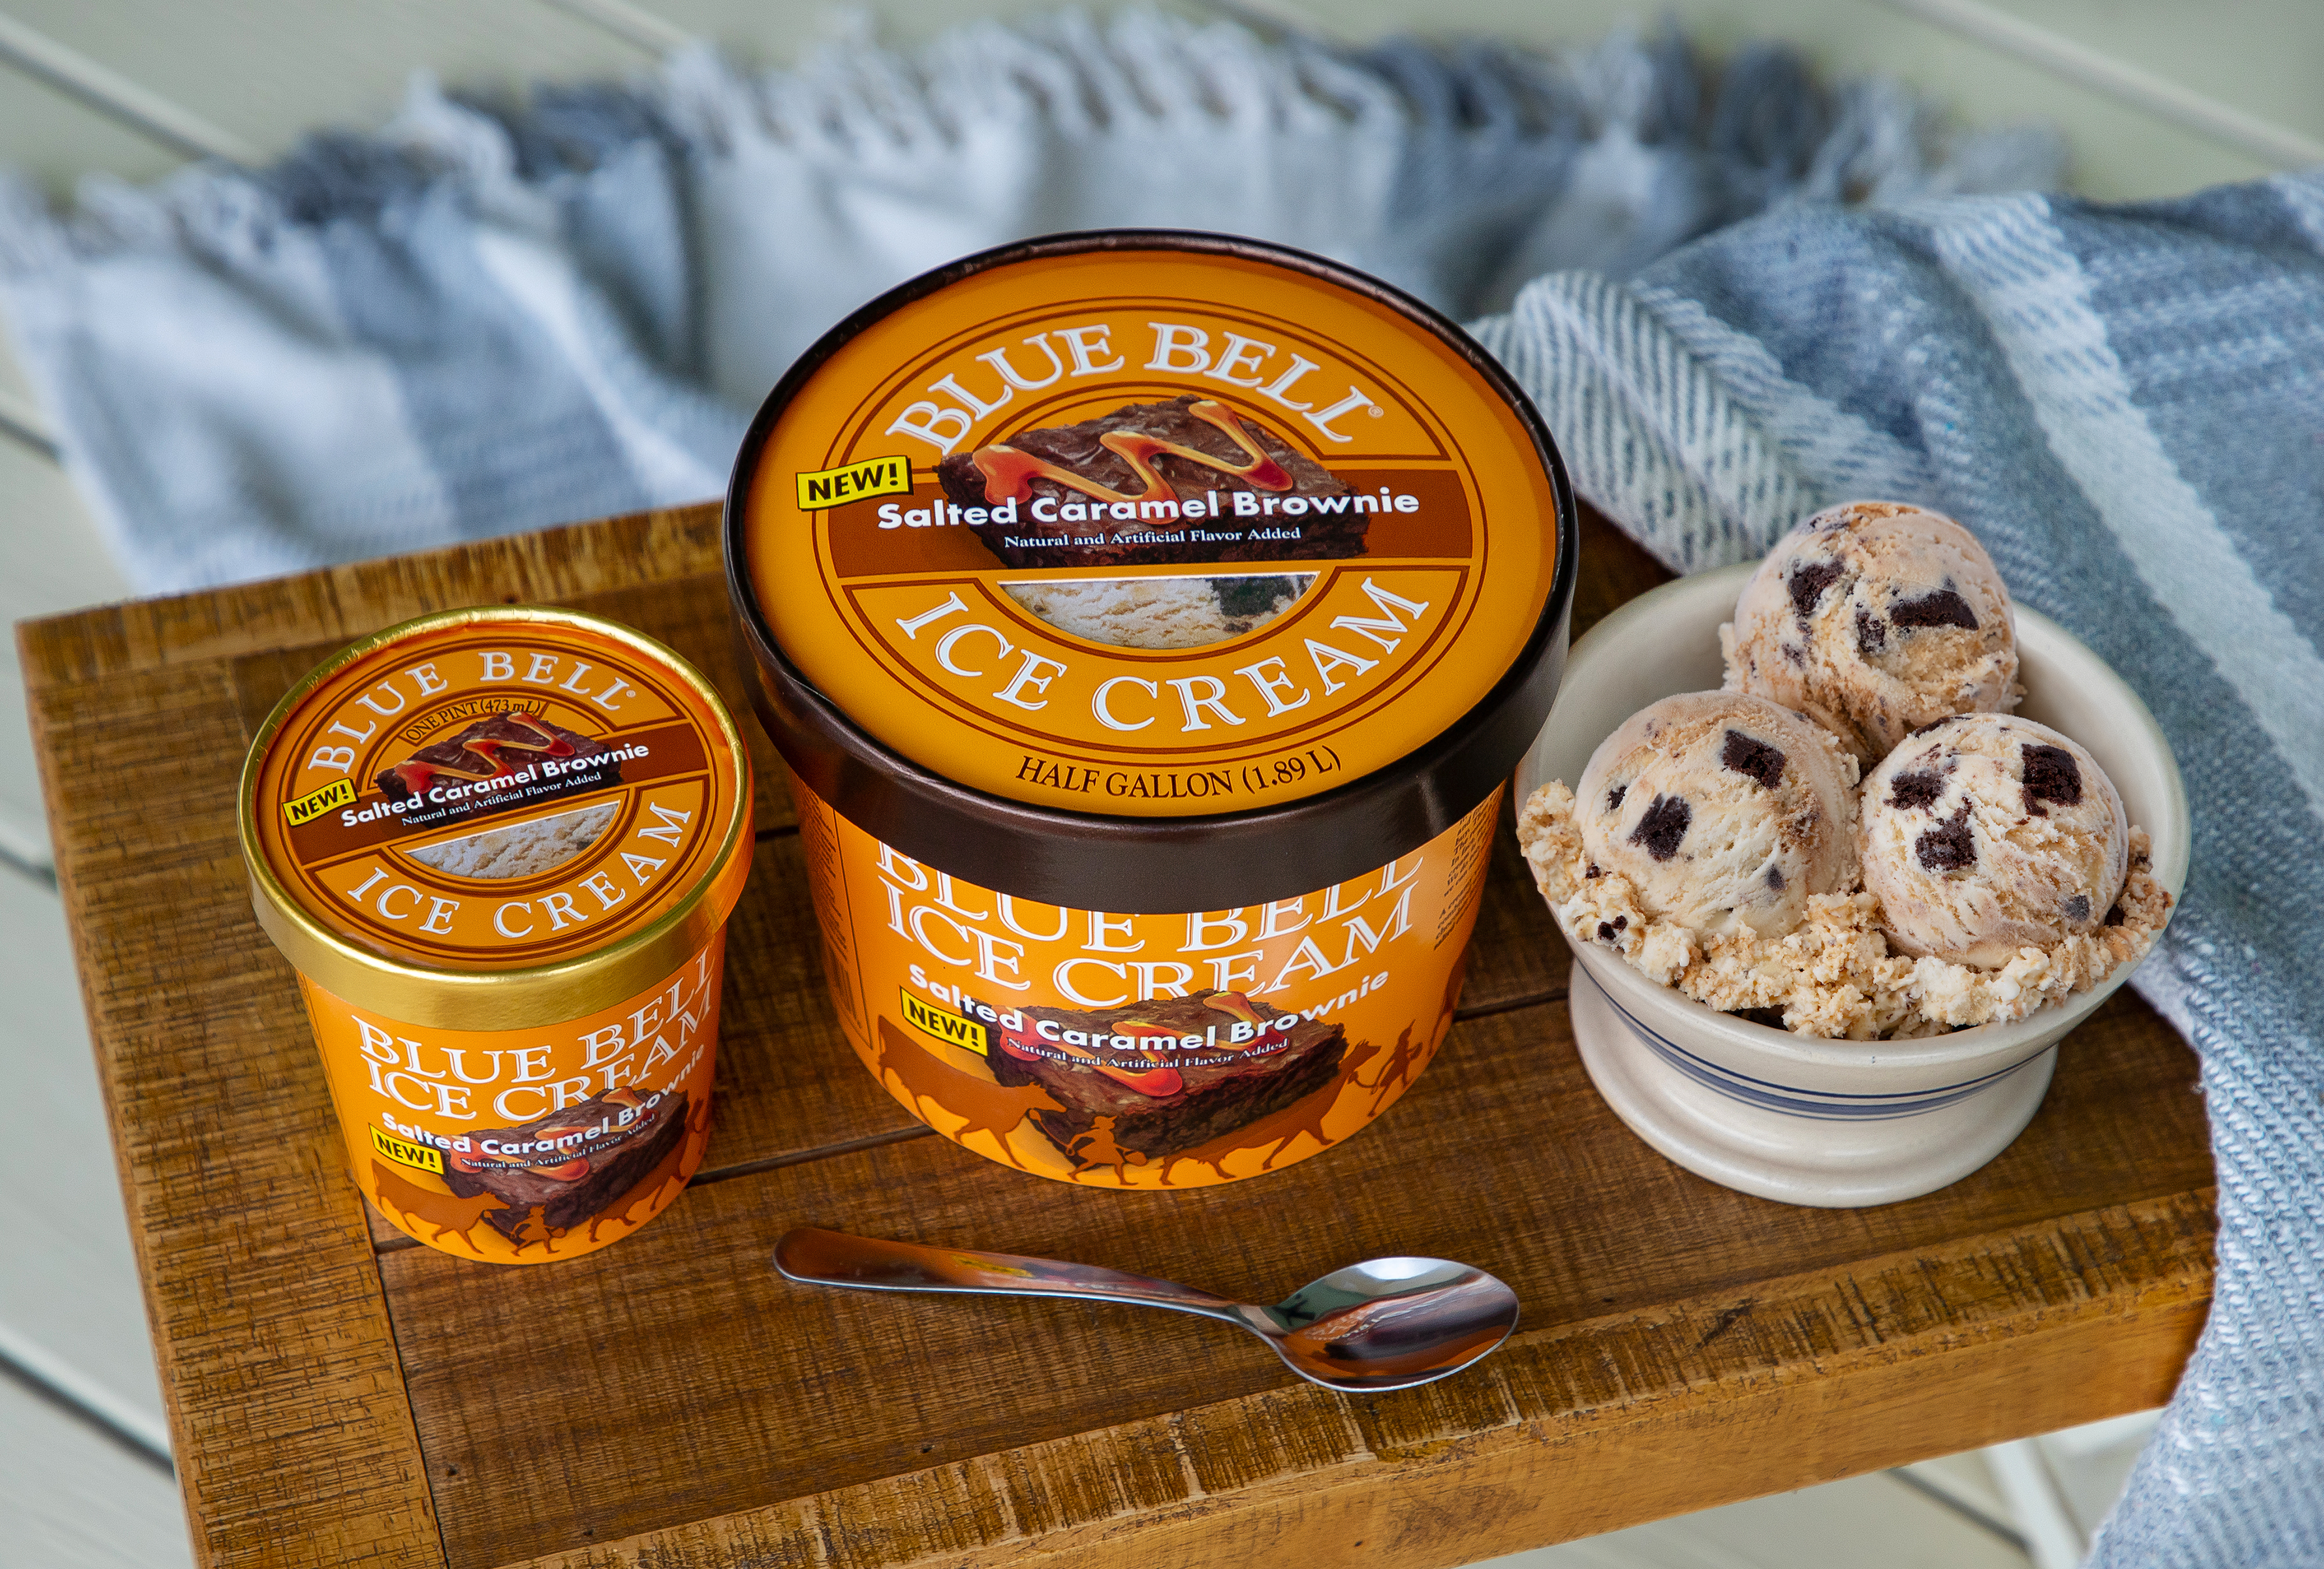 Blue Bell releases new salted caramel brownie flavor ahead of fall